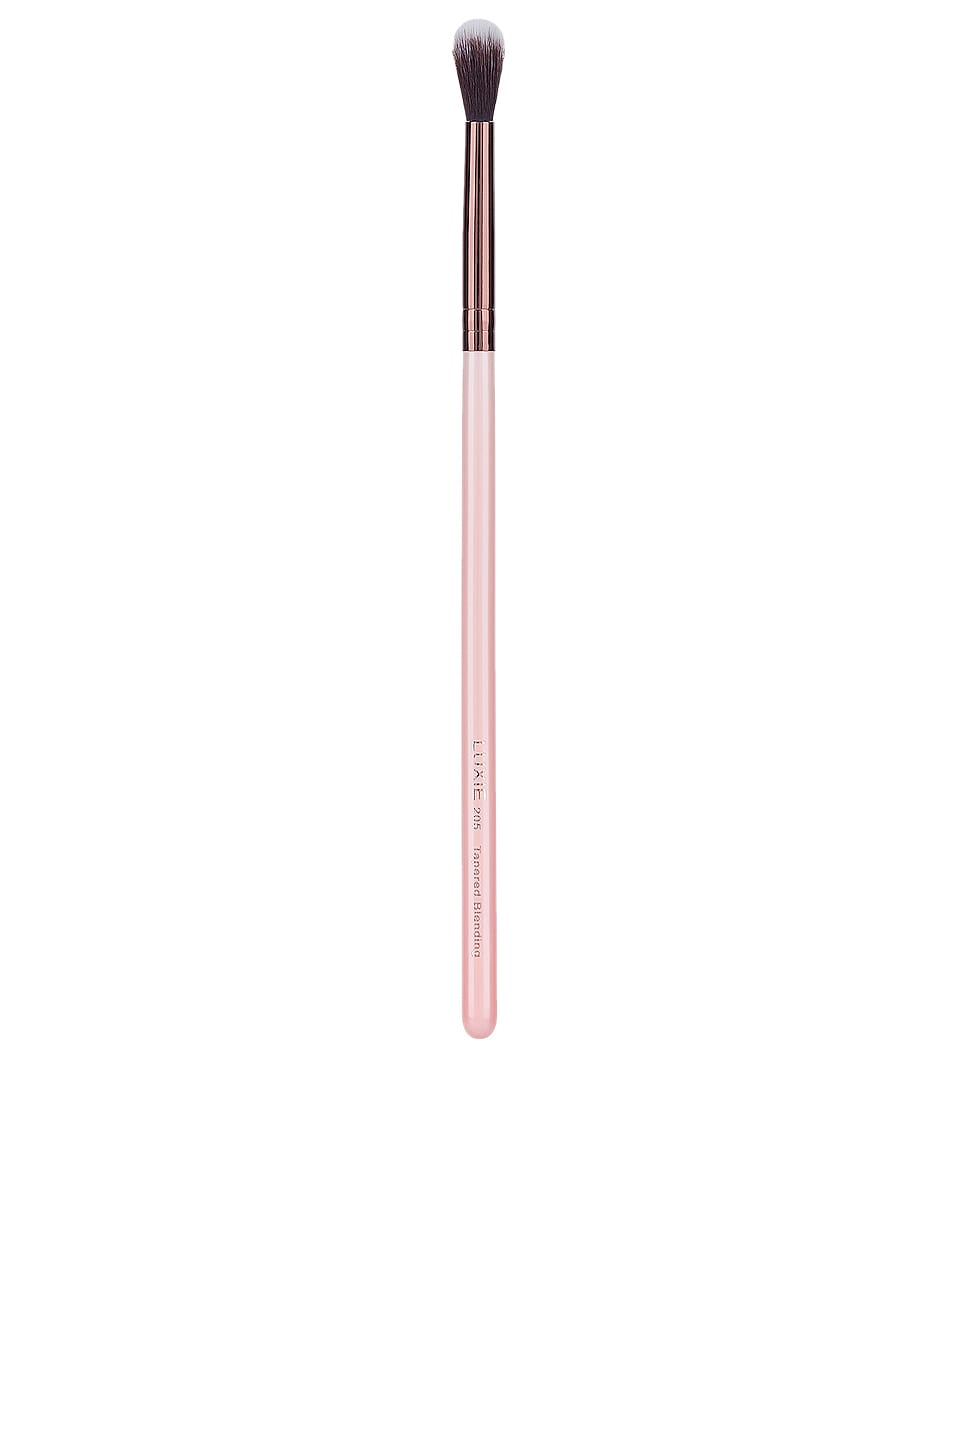 LUXIE LUXIE TAPERED BLENDING BRUSH IN PINK.,LUXR-WU8